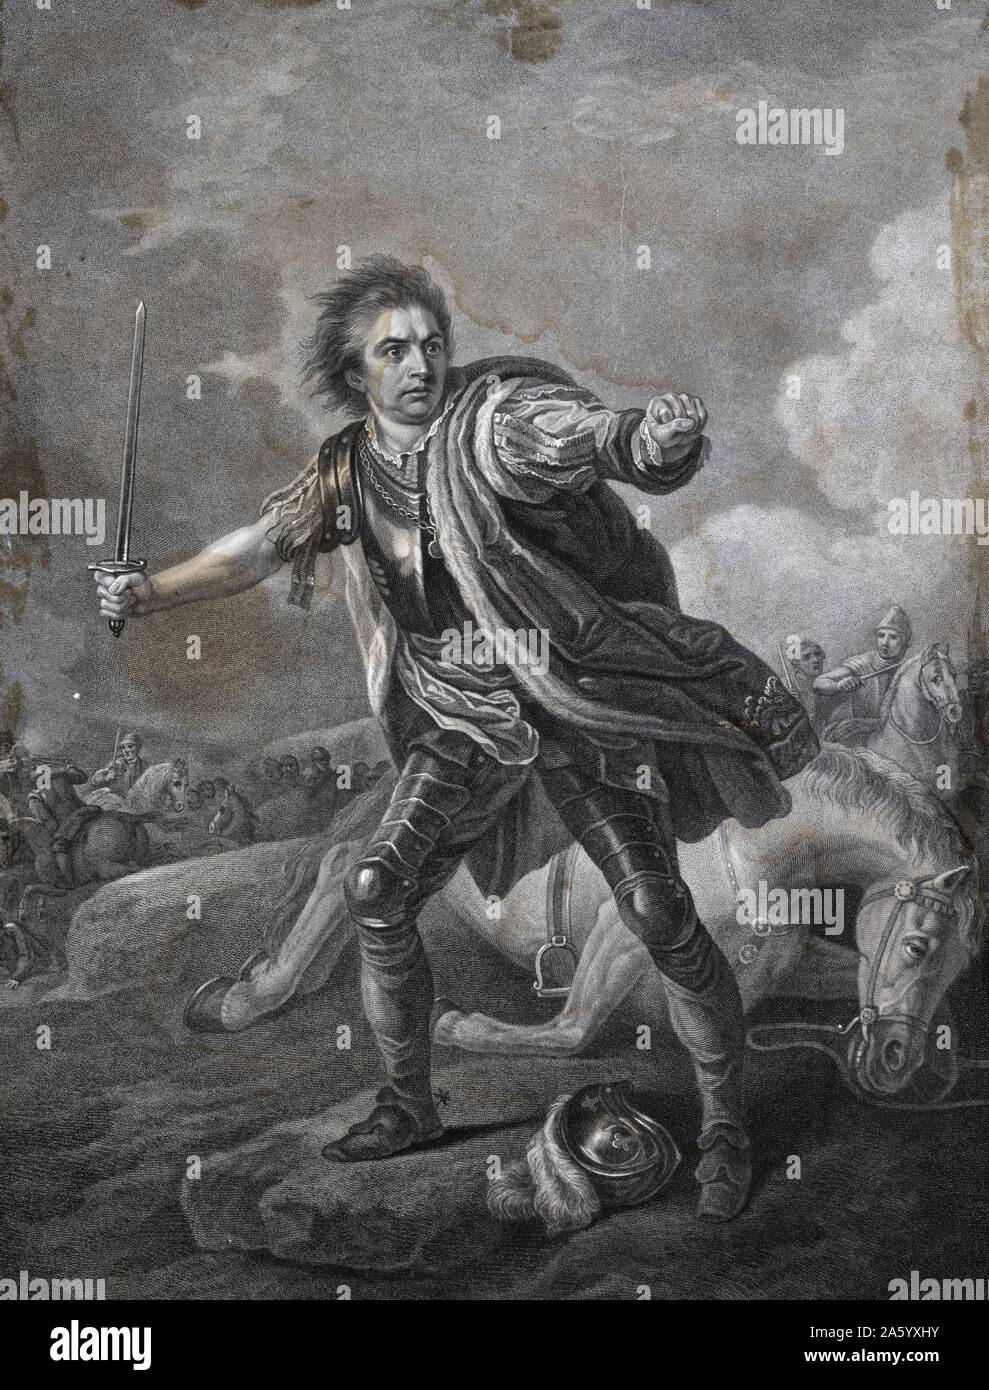 Depiction of actor David Garrick (1717-1779), English actor, playwright, theatre manager and producer, in the role of Richard the Third during the Battle of Bosworth Field. Dated 1811 Stock Photo